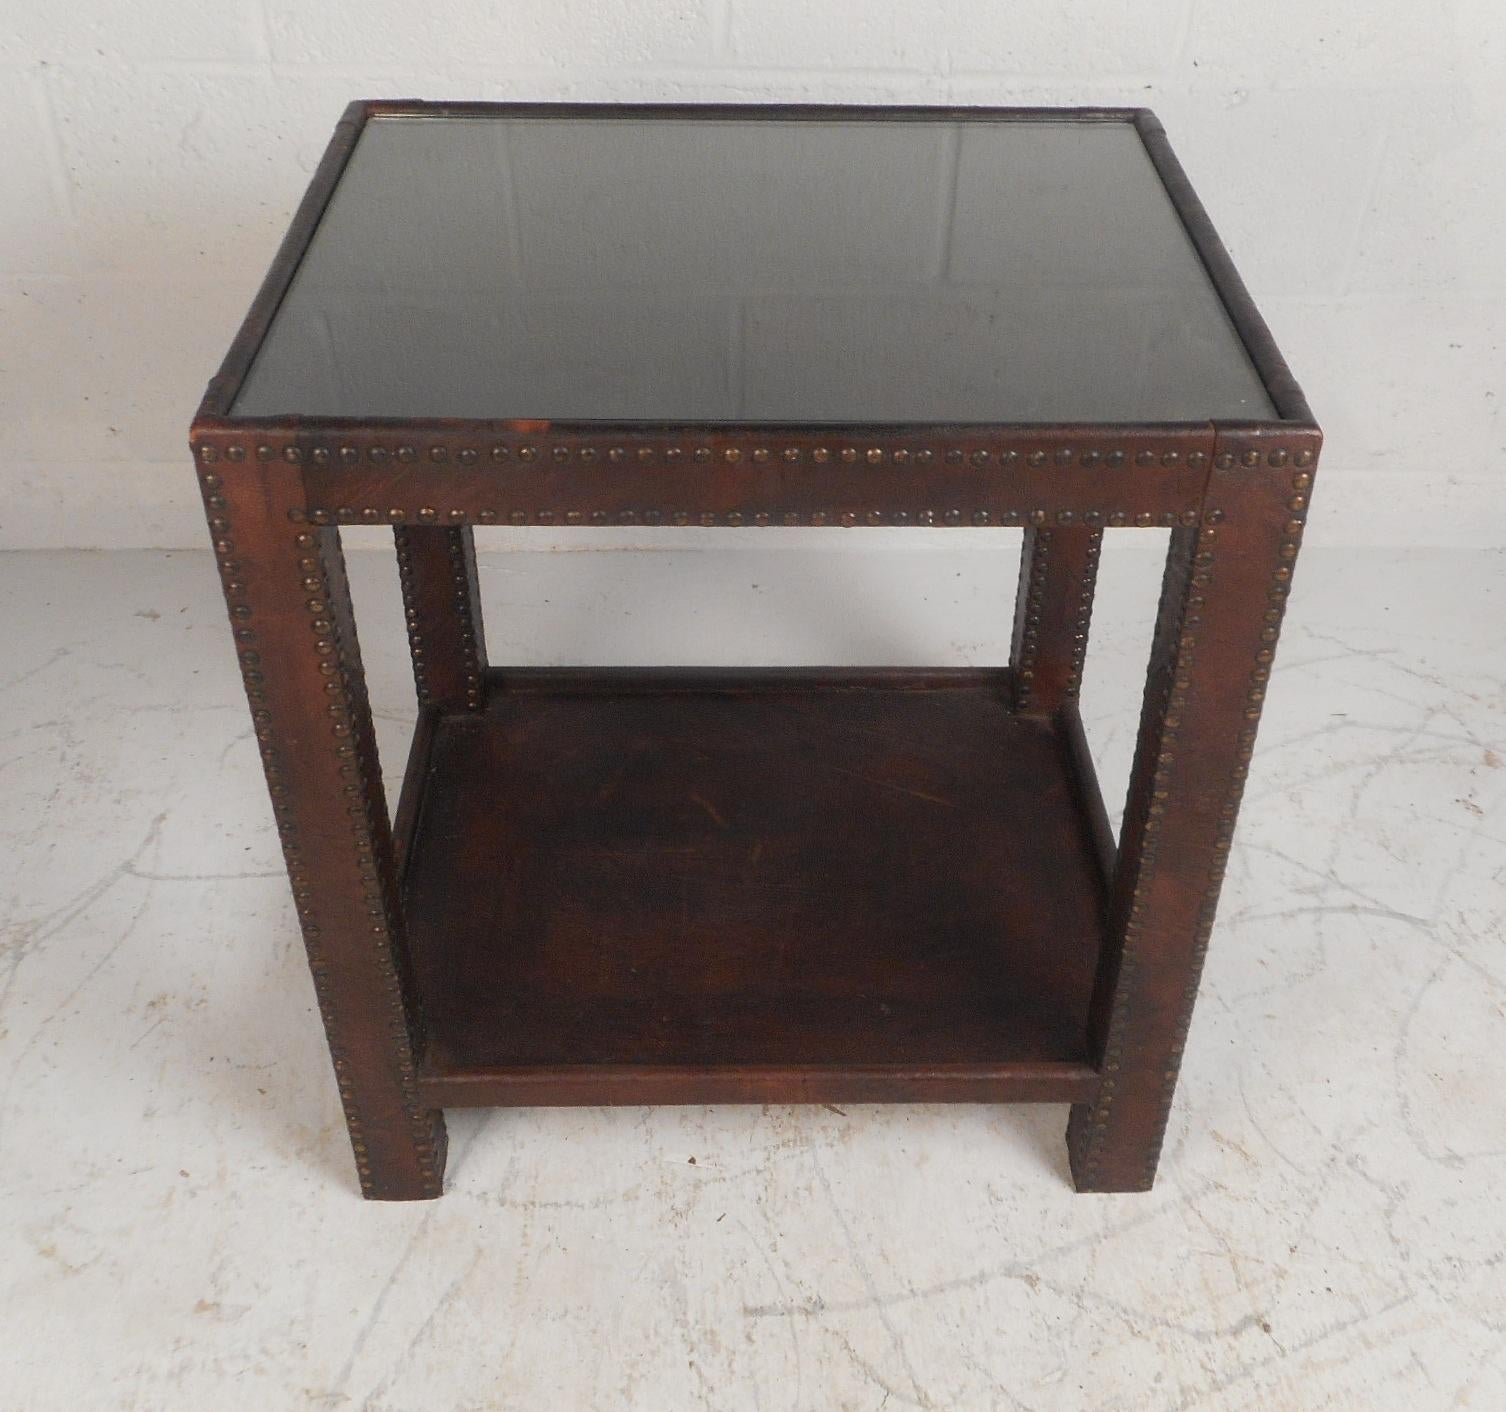 This beautiful vintage modern two-tier side table is covered in brown leather with studs running along the legs and front. A one of a kind piece with a glass top and a lower shelf for additional storage. This lovely midcentury pedestal table makes